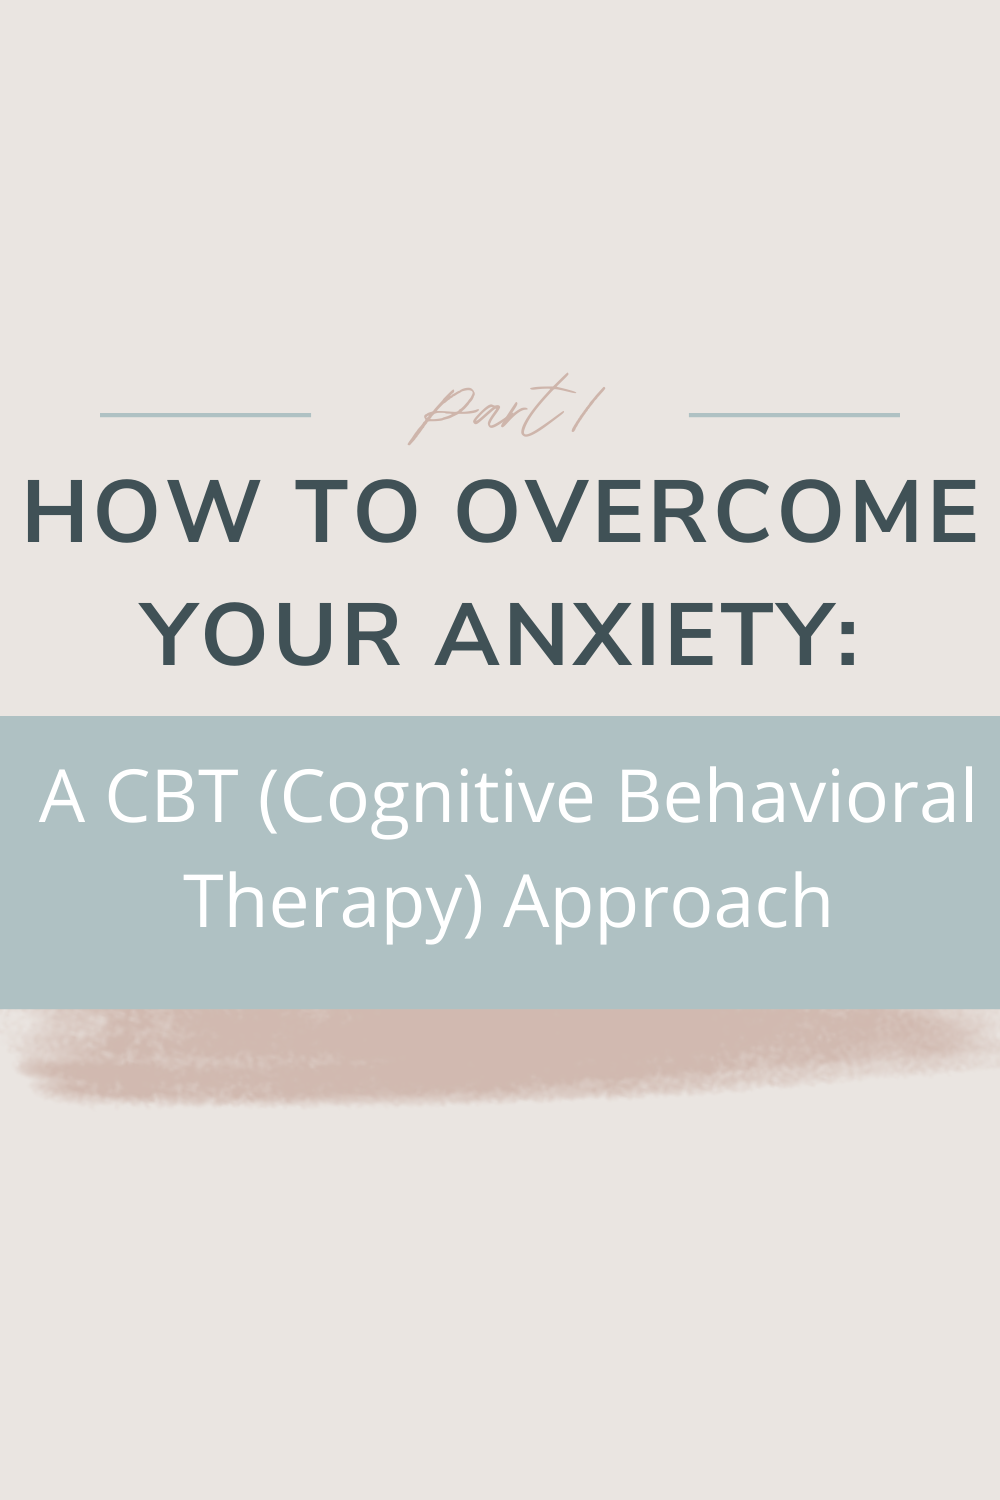 How to Overcome Your Anxiety: A CBT Approach | Nearly everyone would raise their hand if I asked THIS question. Truth is, we all have experienced it at some point or another. But what is anxiety, really? How do we manage it? And how does it impact us? Check out this blog series to learn more, cheers!